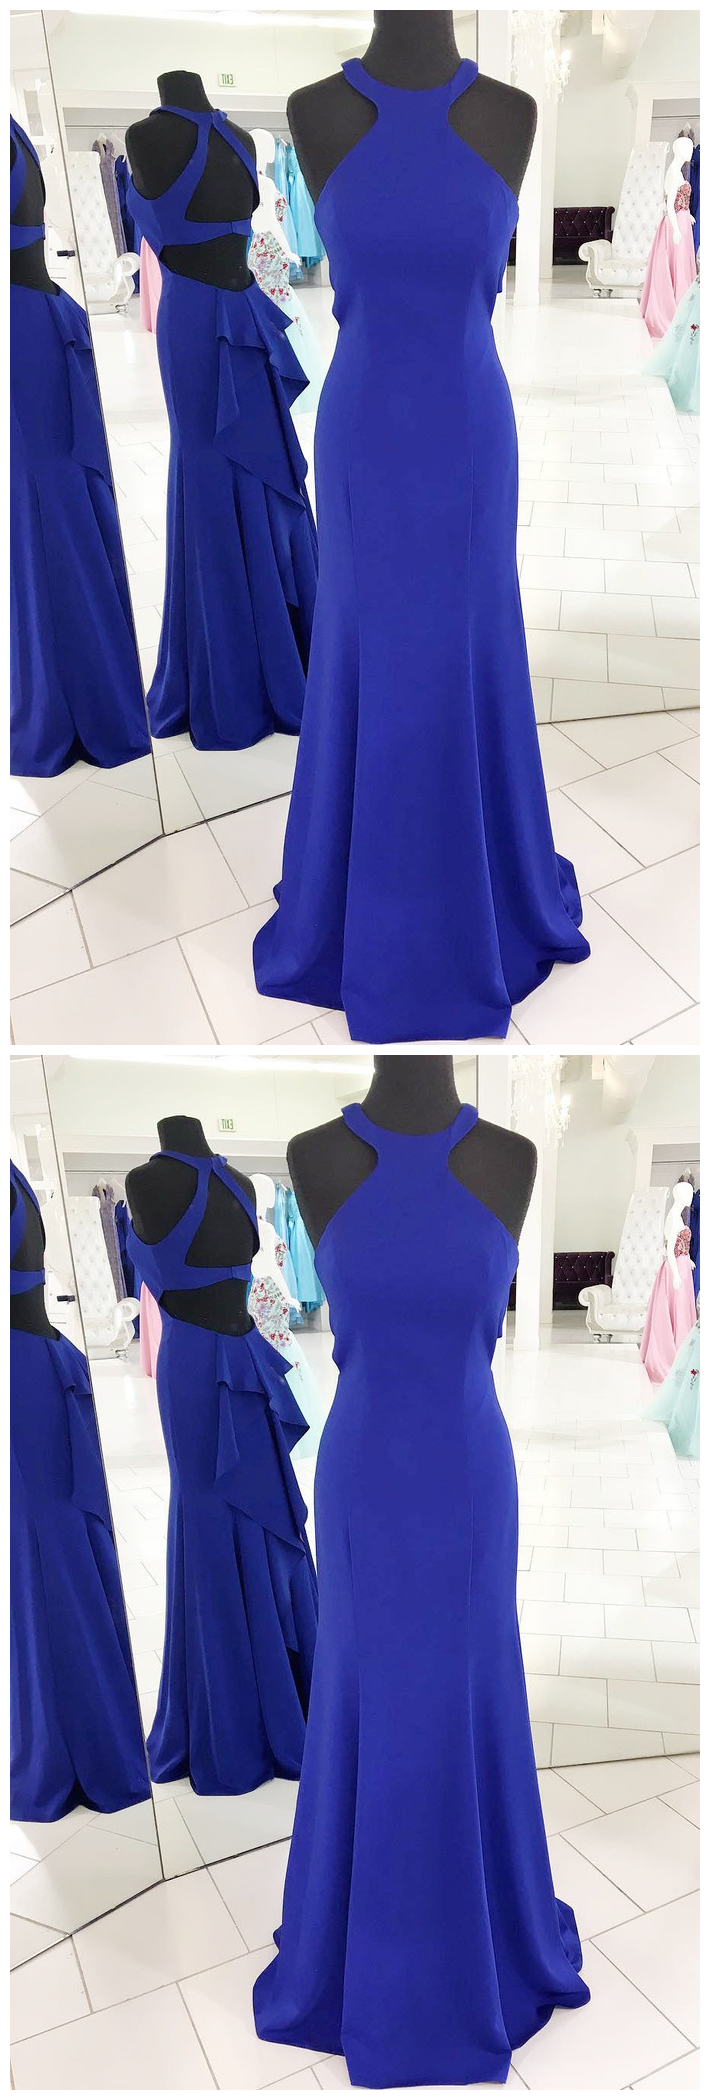 Royal Blue Prom Dress 2019, Birthday Party Gown, Homecoming Dress Long, Back To Schoold Party Gown